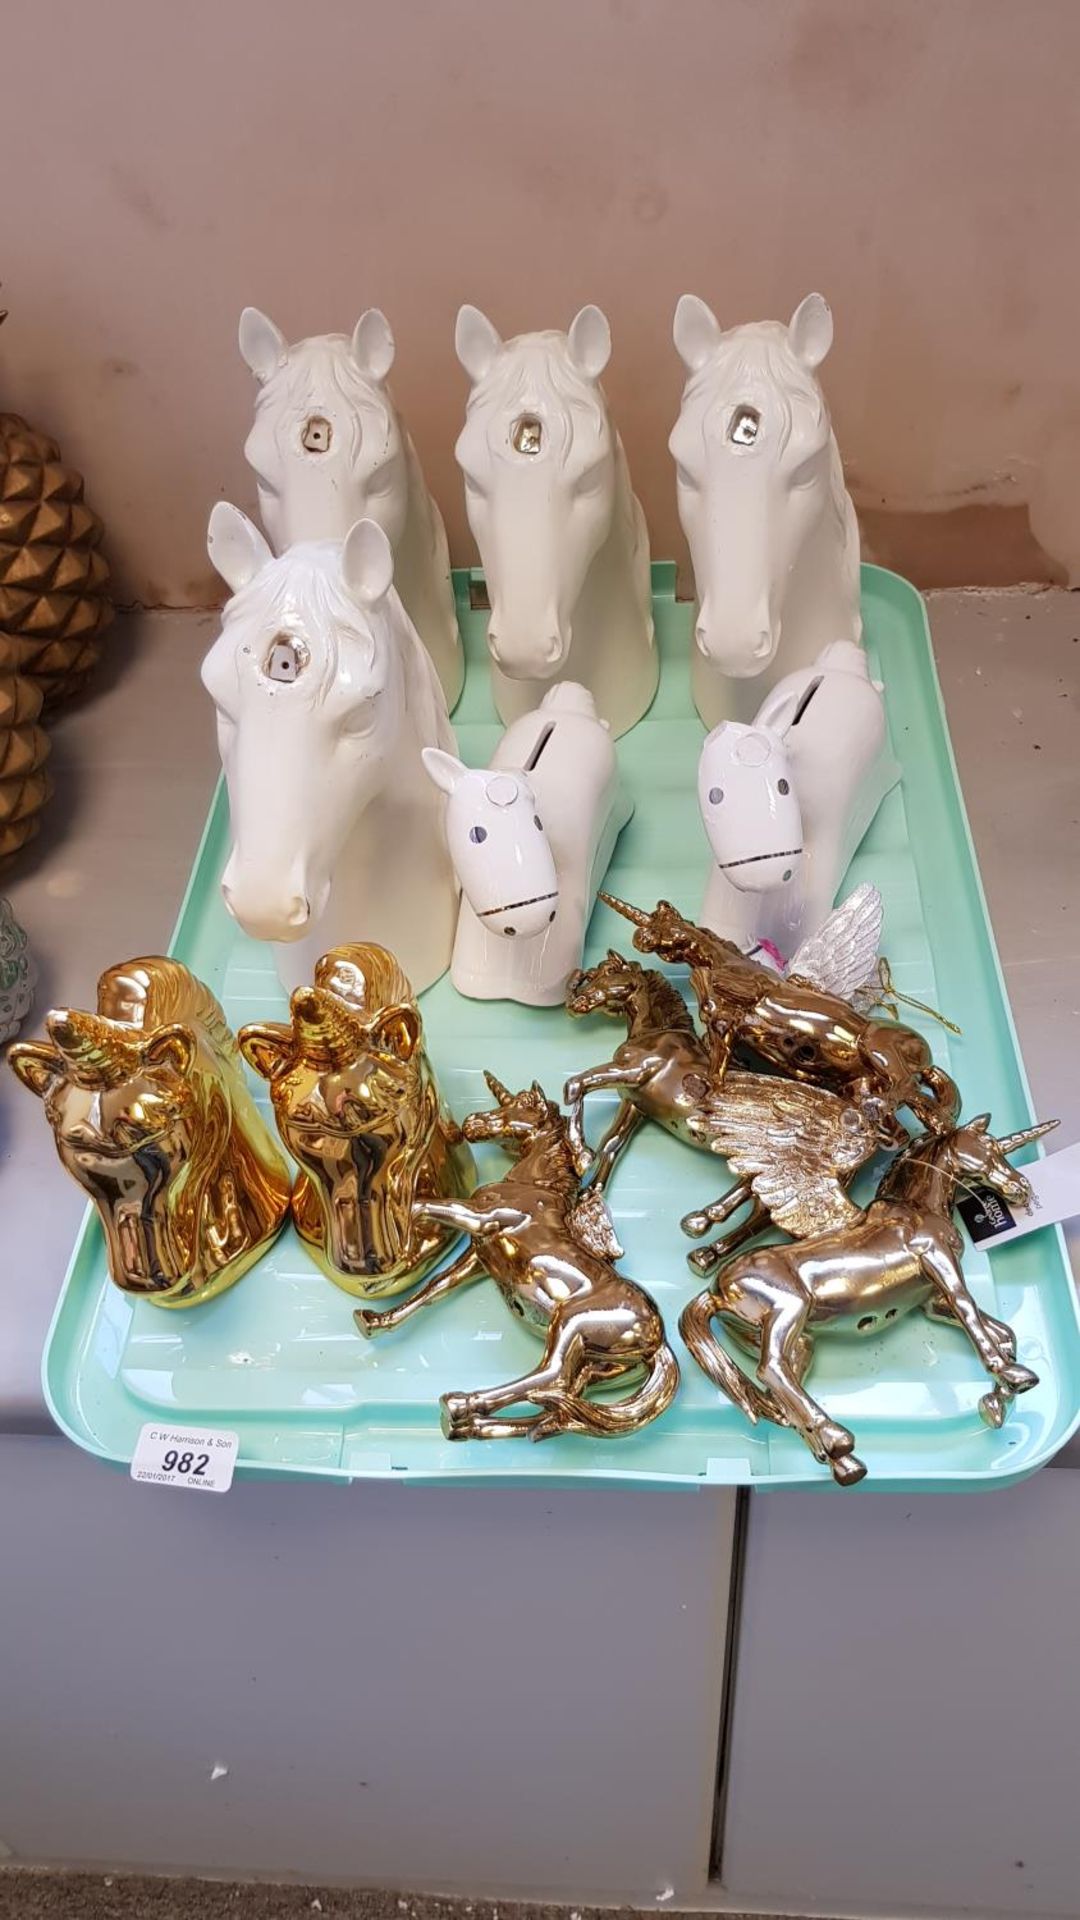 Contents of Tray – (12x) Mixed Unicorn/Horse Ornaments (as seen)